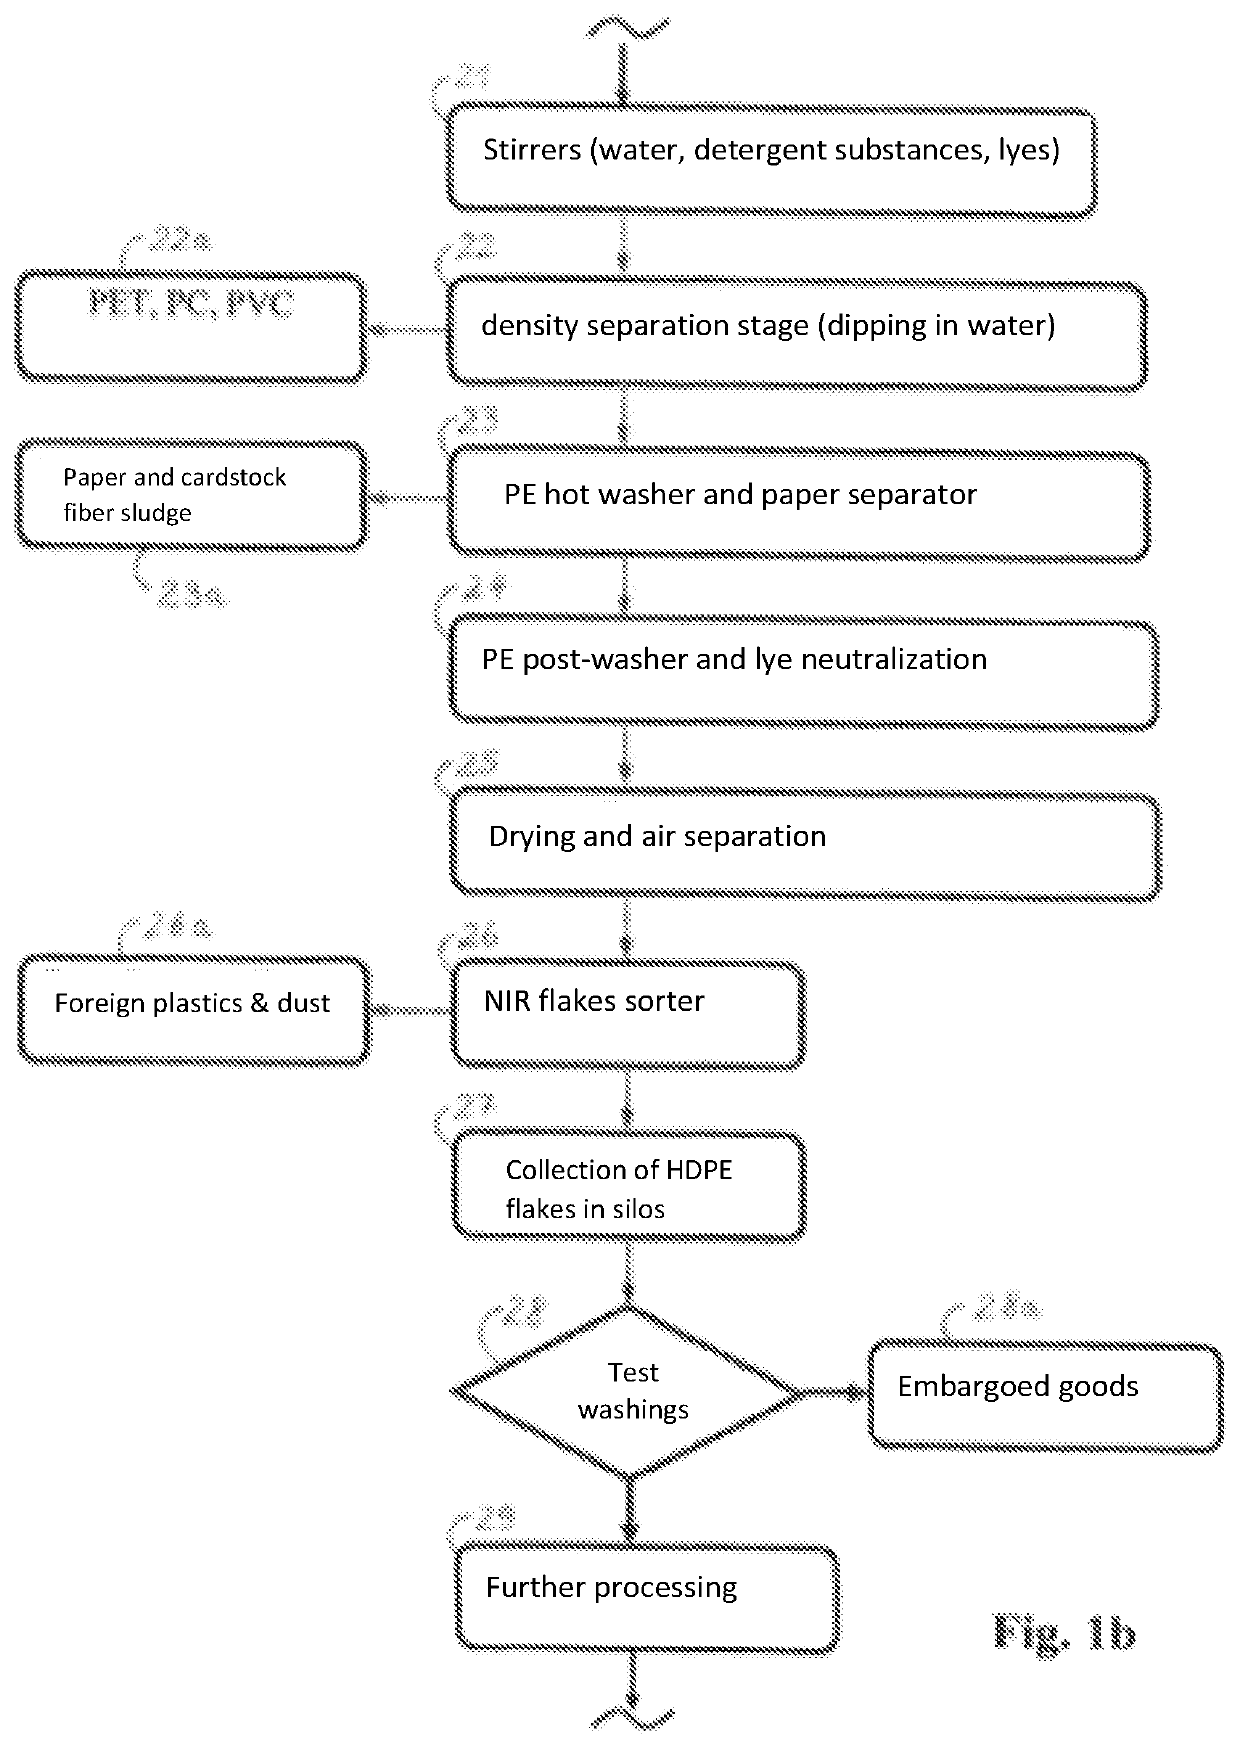 System and process for recycling contaminated polyolefins